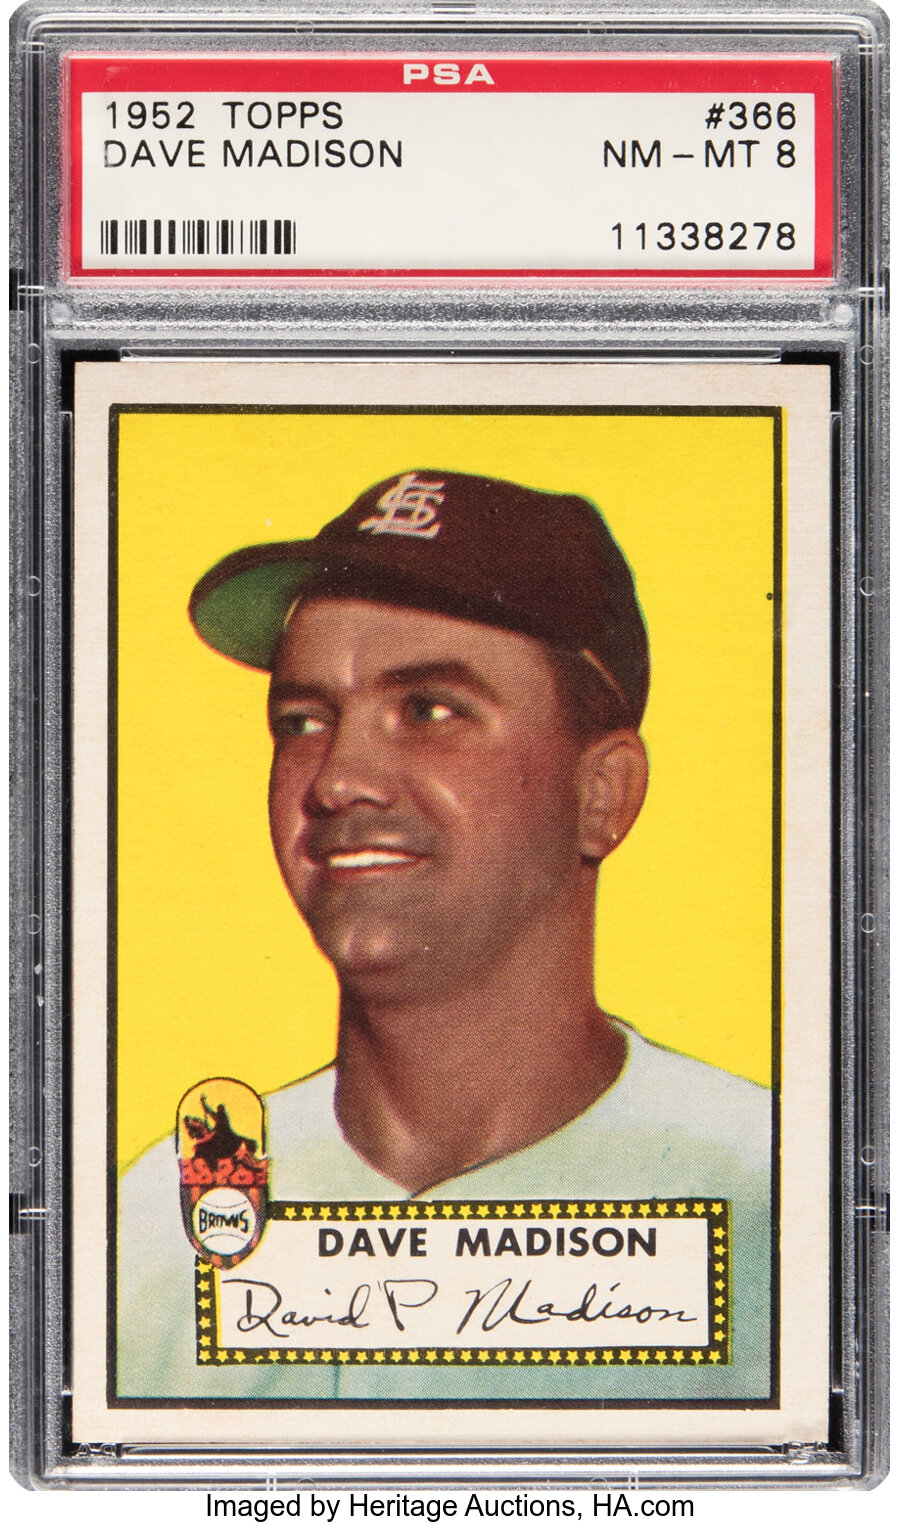 1952 Topps Dave Madison Rookie #366 PSA NM-MT 8 - Six Higher!